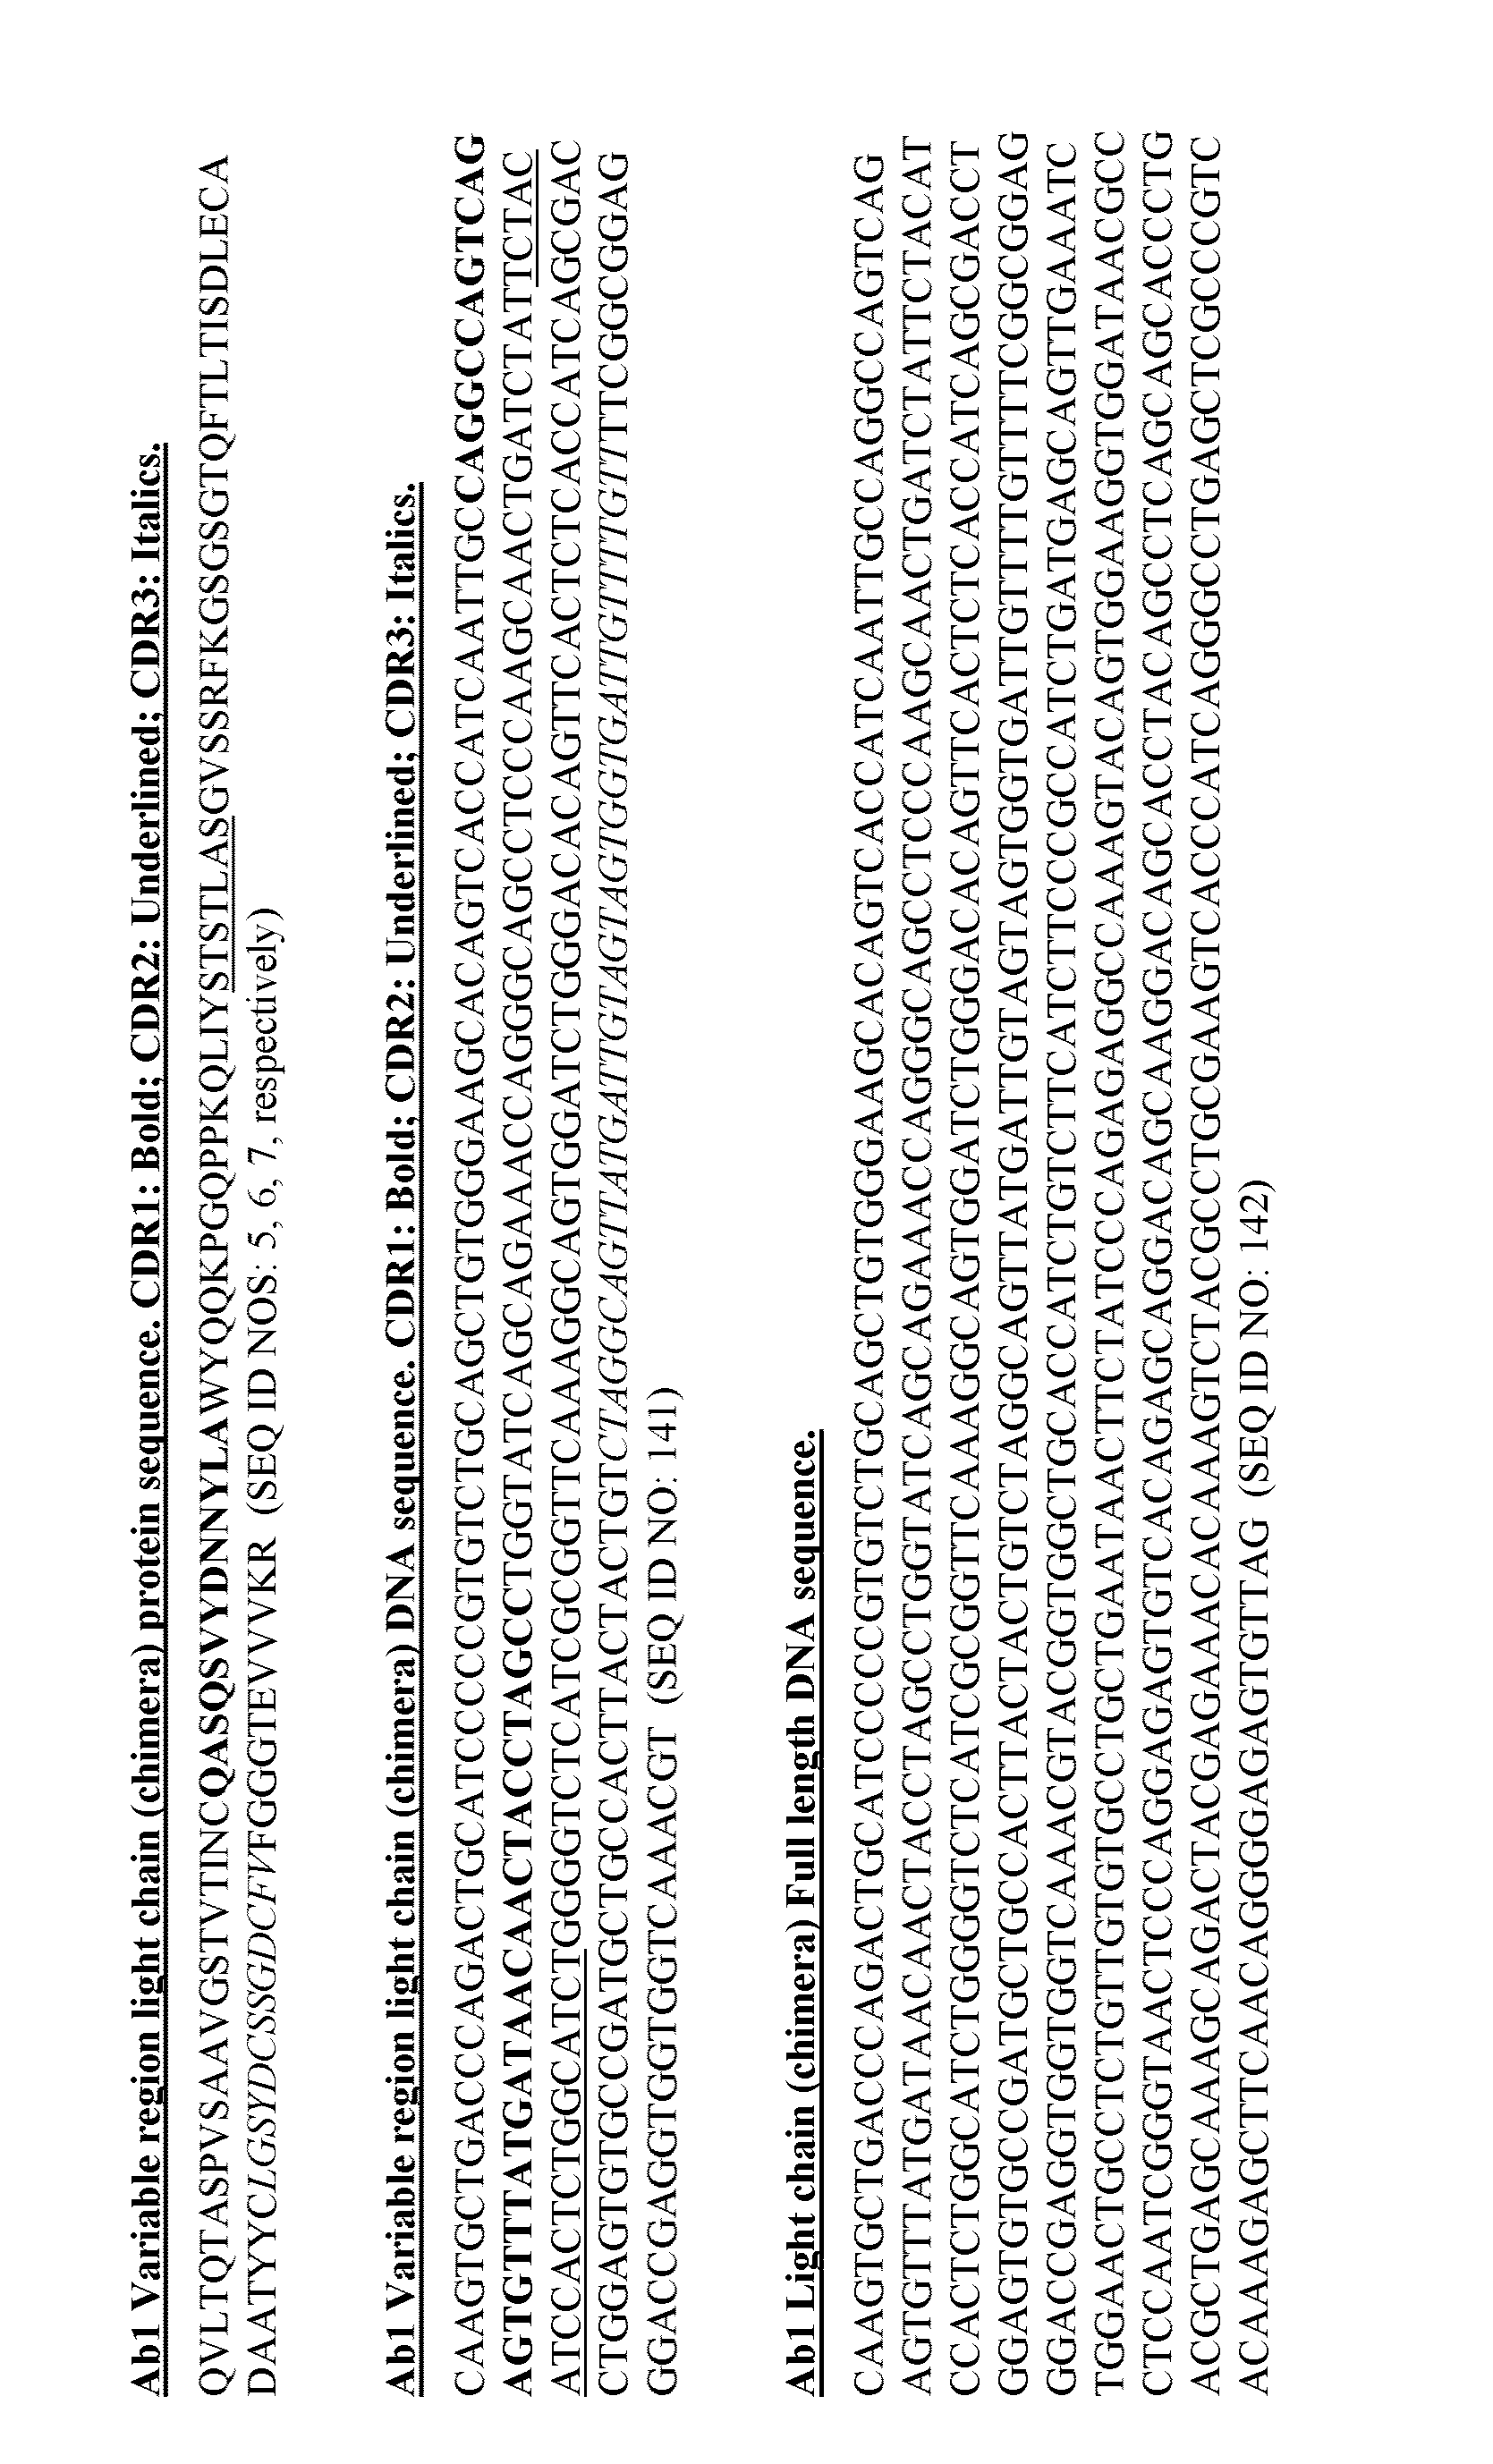 Anti-cgrp compositions and use thereof